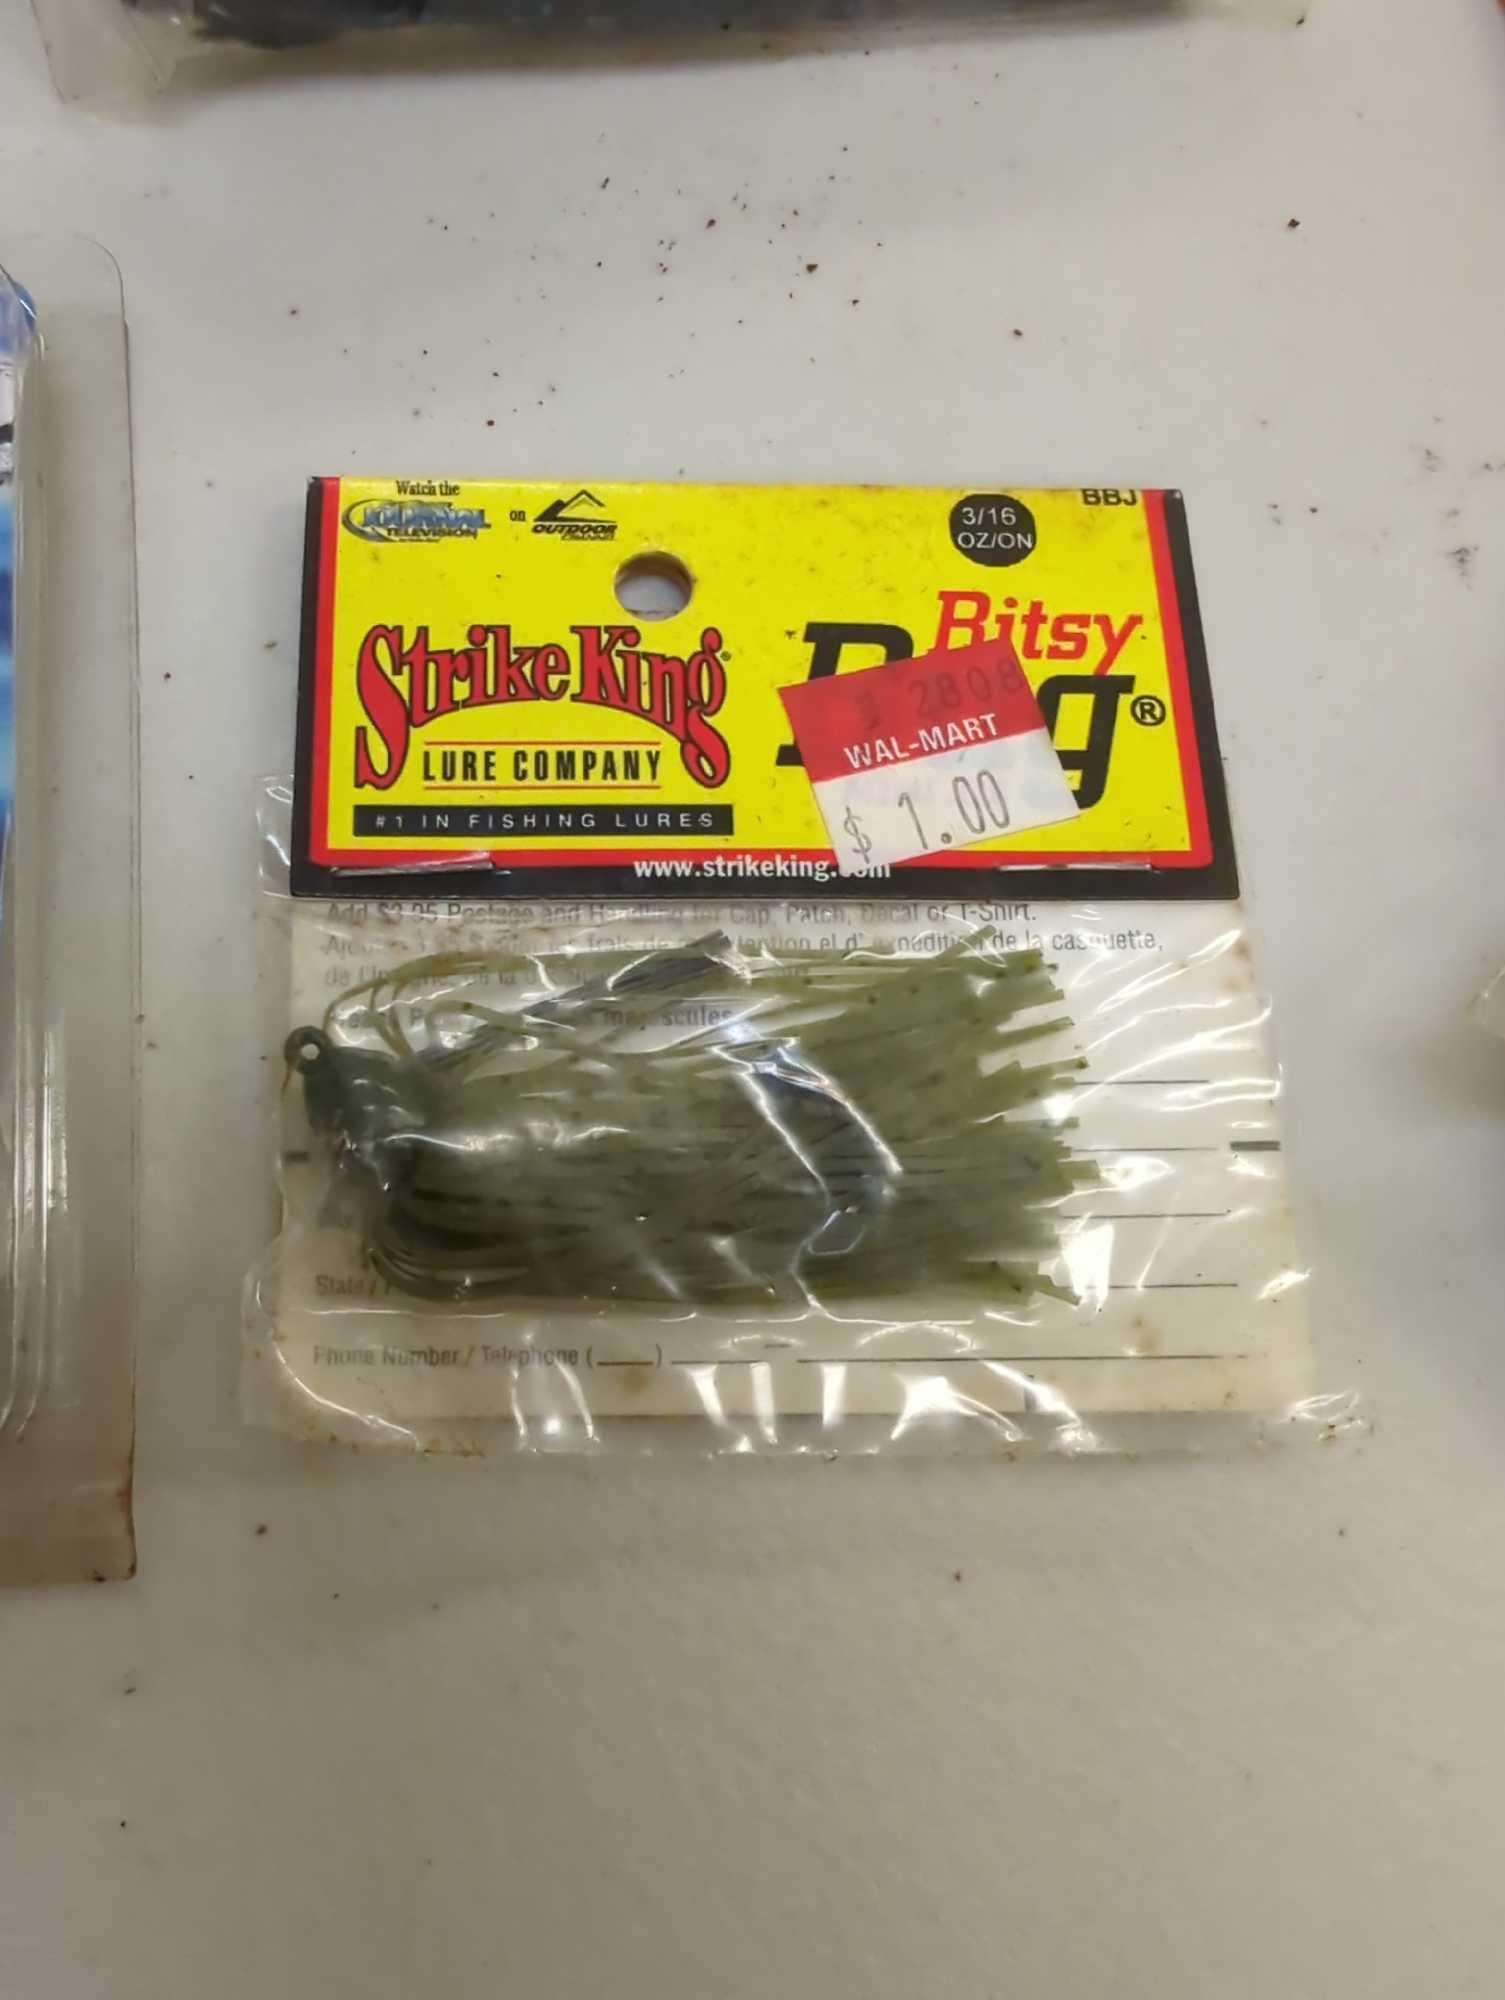 Tackle Box and contents including various fishing lures. Comes as is shown in photos. Appears to be